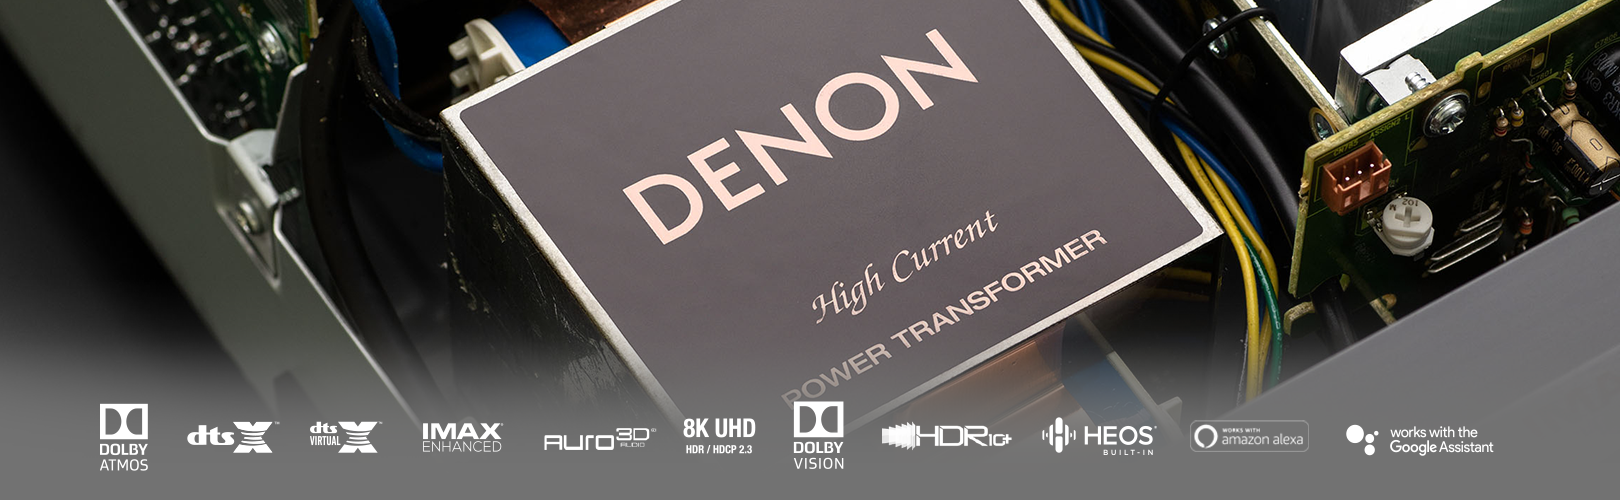 Denon 2021 AV receiver line-up: everything you need to know, by What Hi-Fi